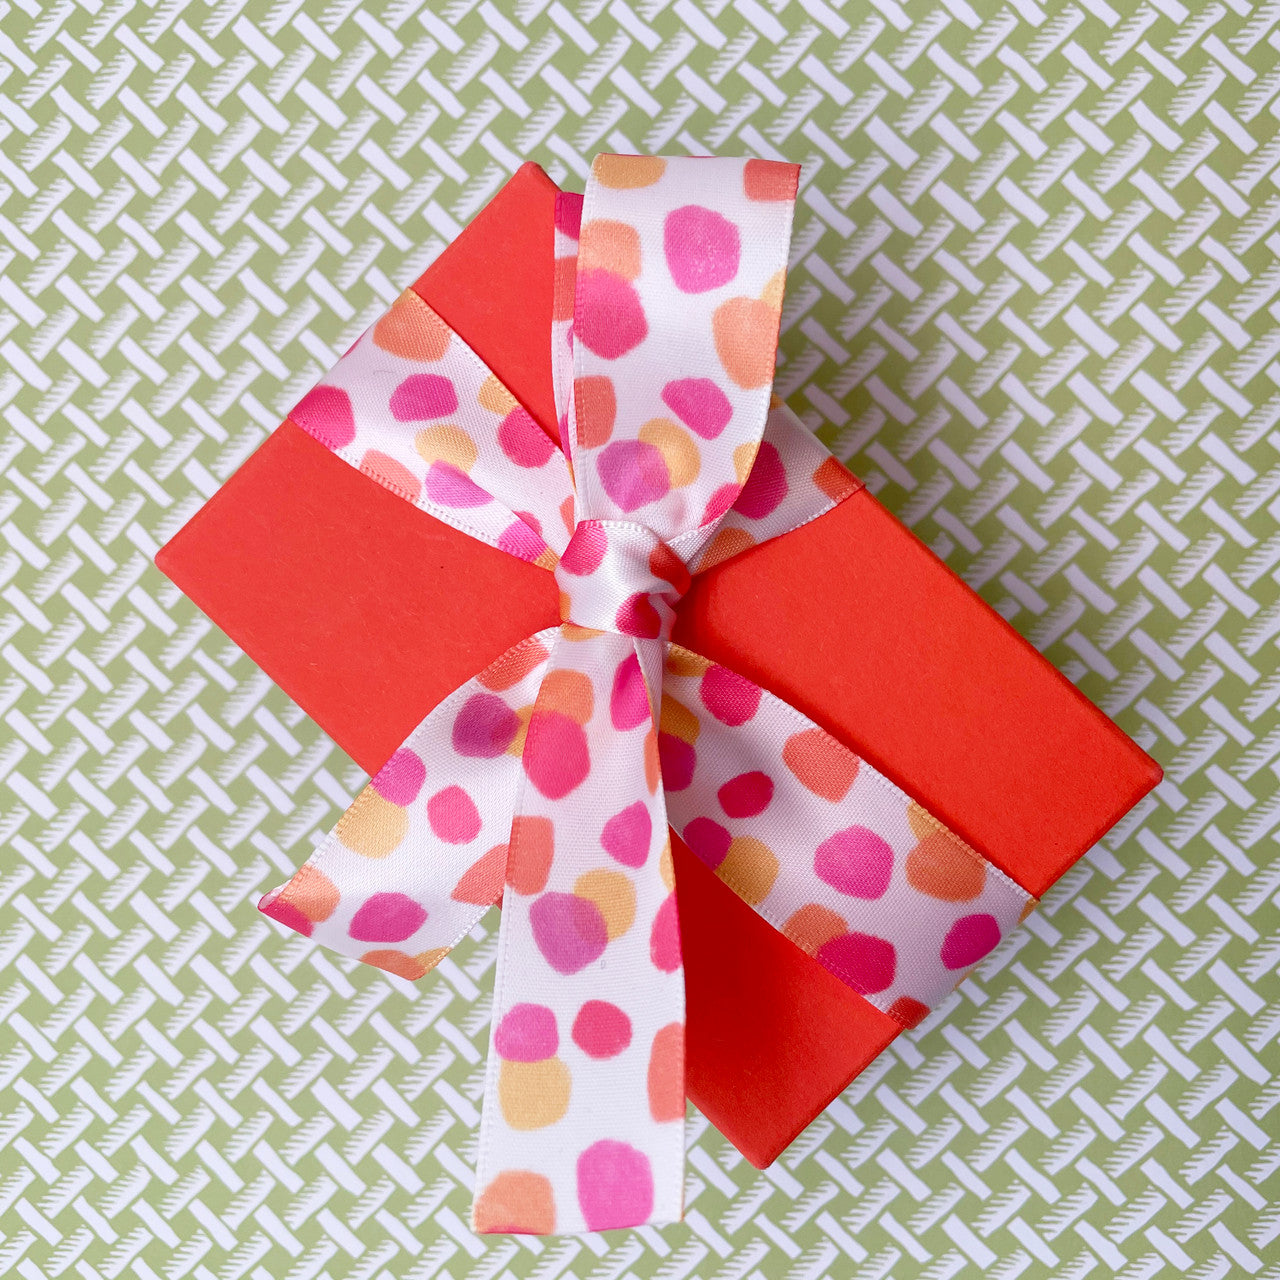 A fun little gift looks sweet with our watercolor dots ribbon tied in a  bow!